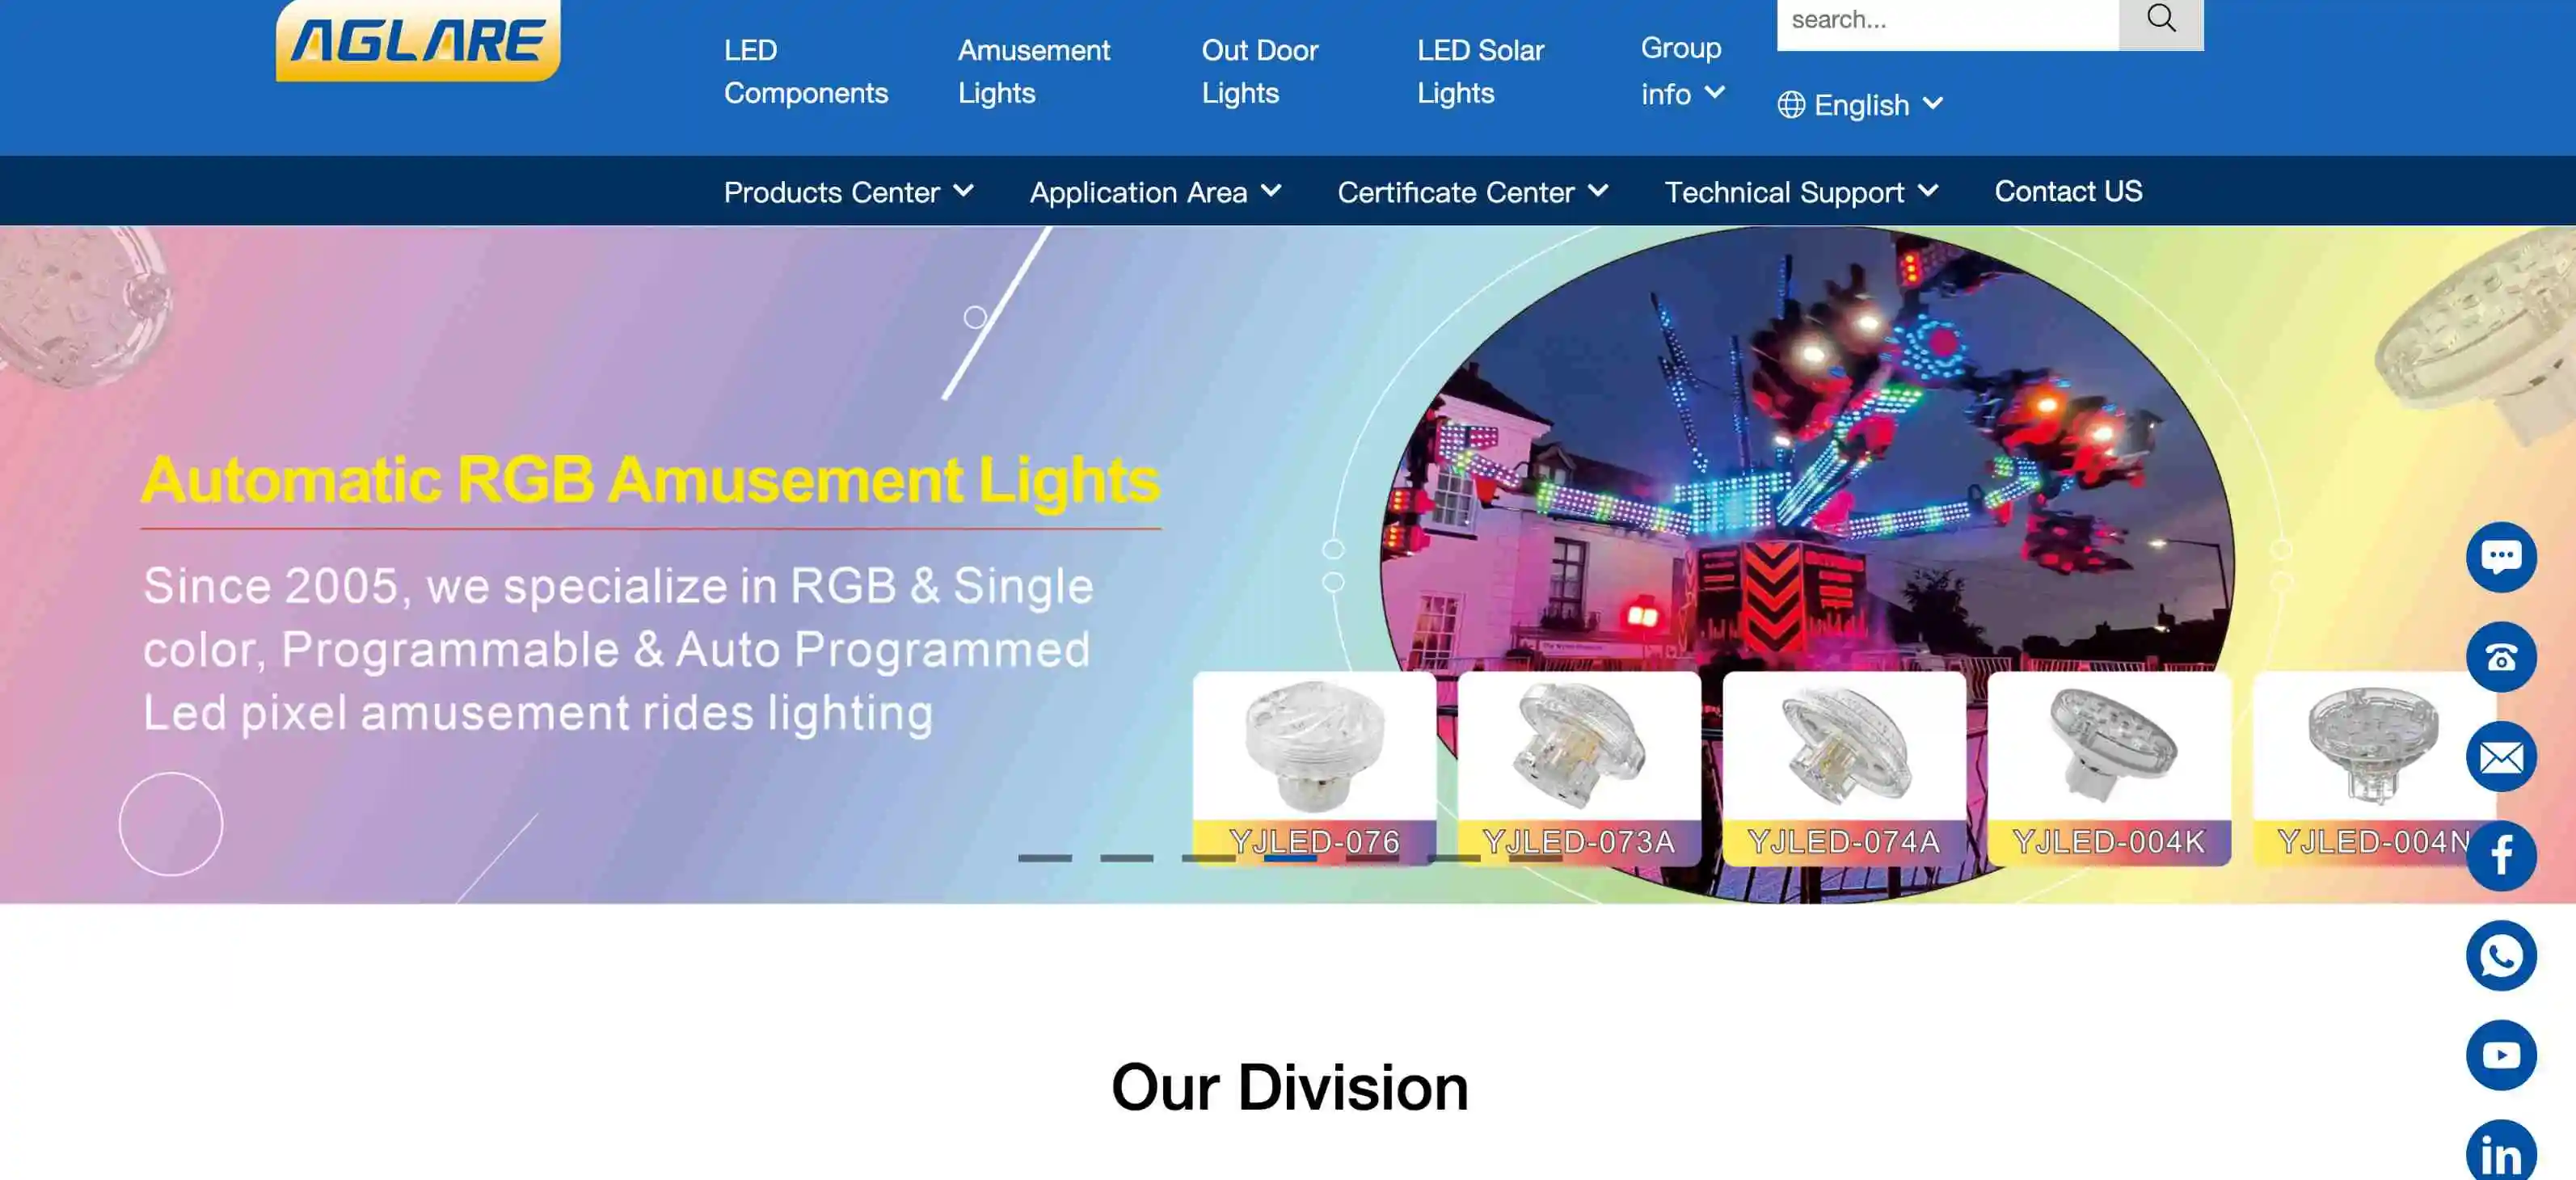 Homepage of Aglare Lighting a company specializing in LED lights for homes and businesses